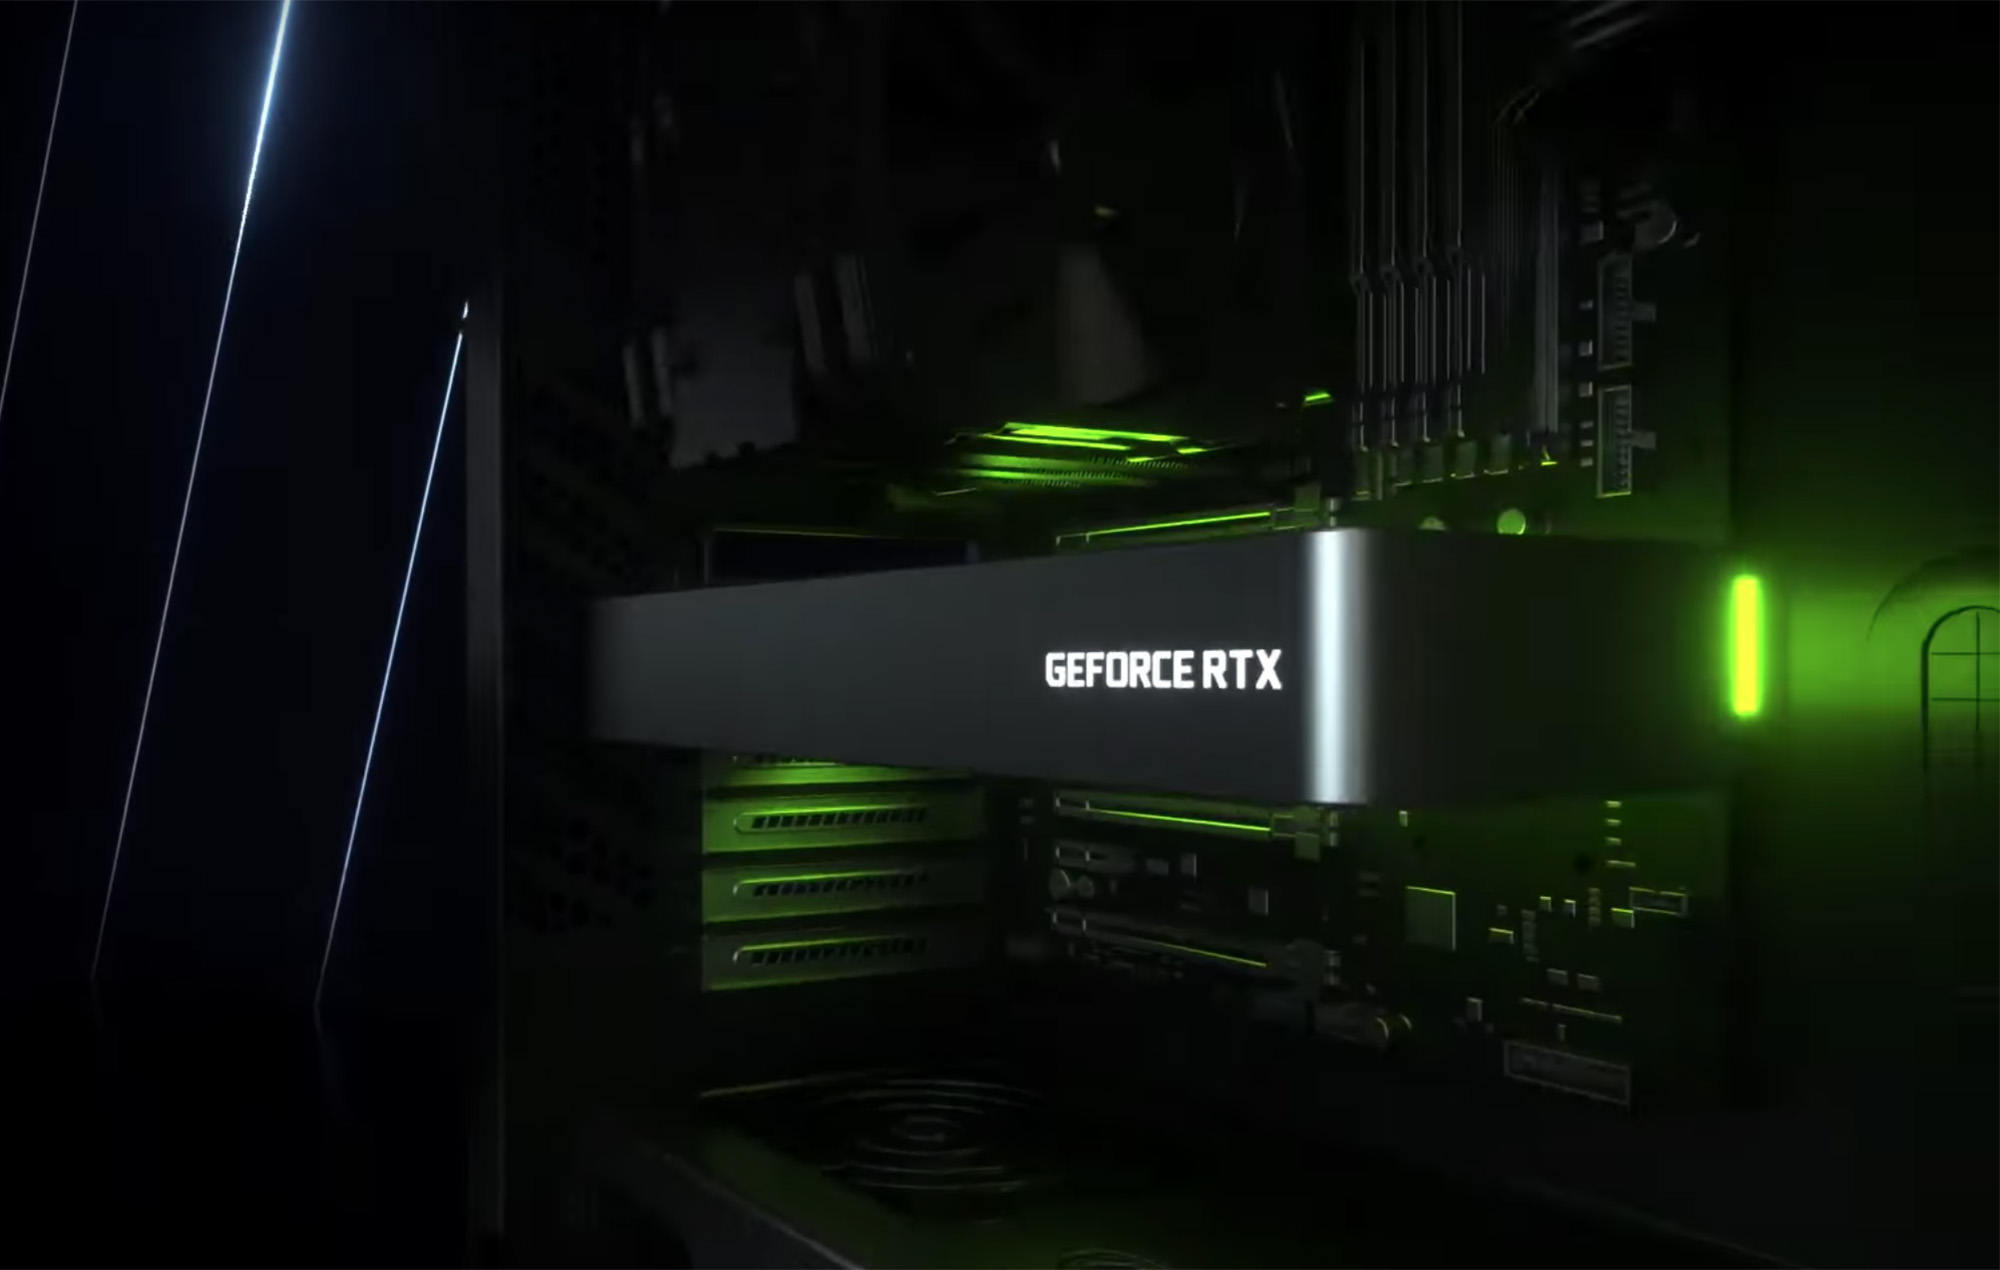 First hi-res photos showing the GeForce RTX 3050's GA106-150 GPU Appear Online